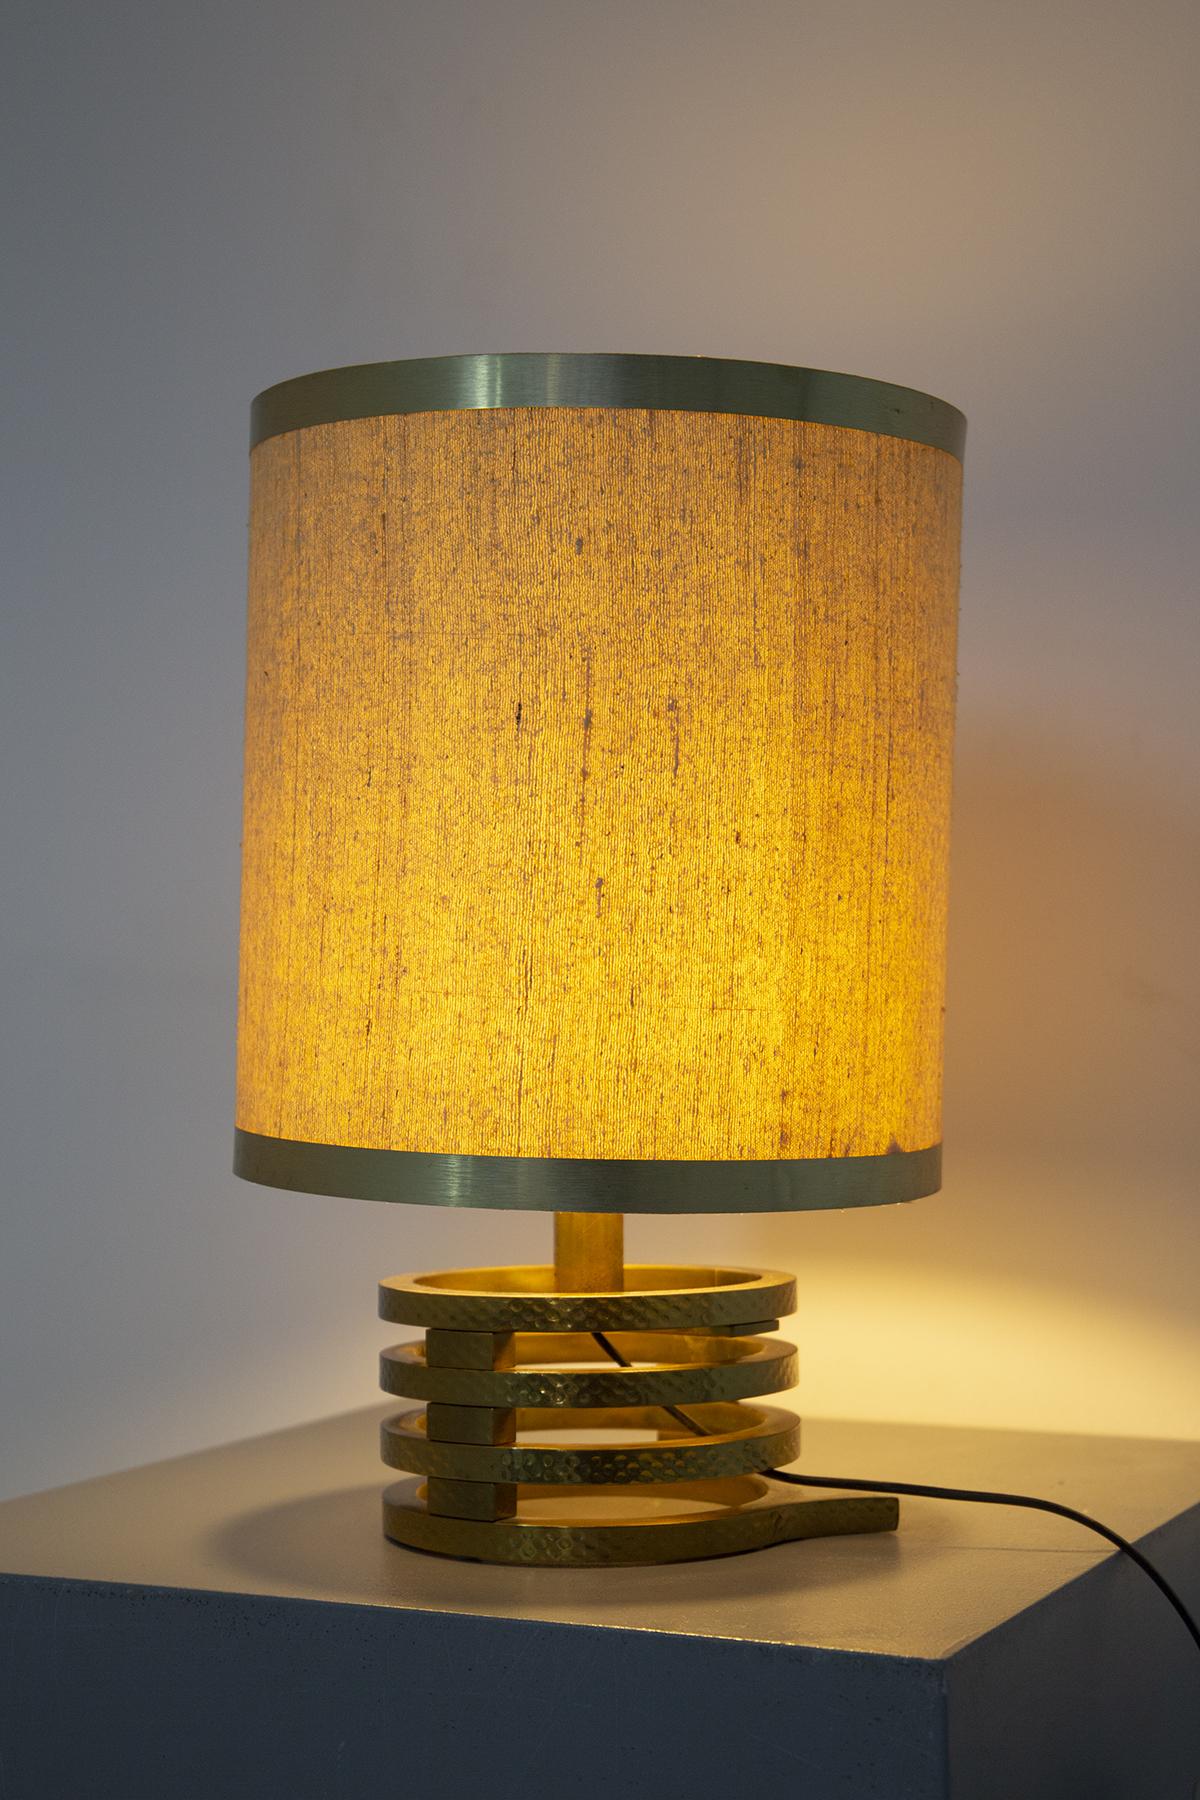 Beautiful table lamp designed by Luciano Frigerio in brass in the 60's, of fine Italian manufacture.The base is made of brass and has a circular shape made in alternating bands, creating a brass serpentine. The base is totally made of brass in